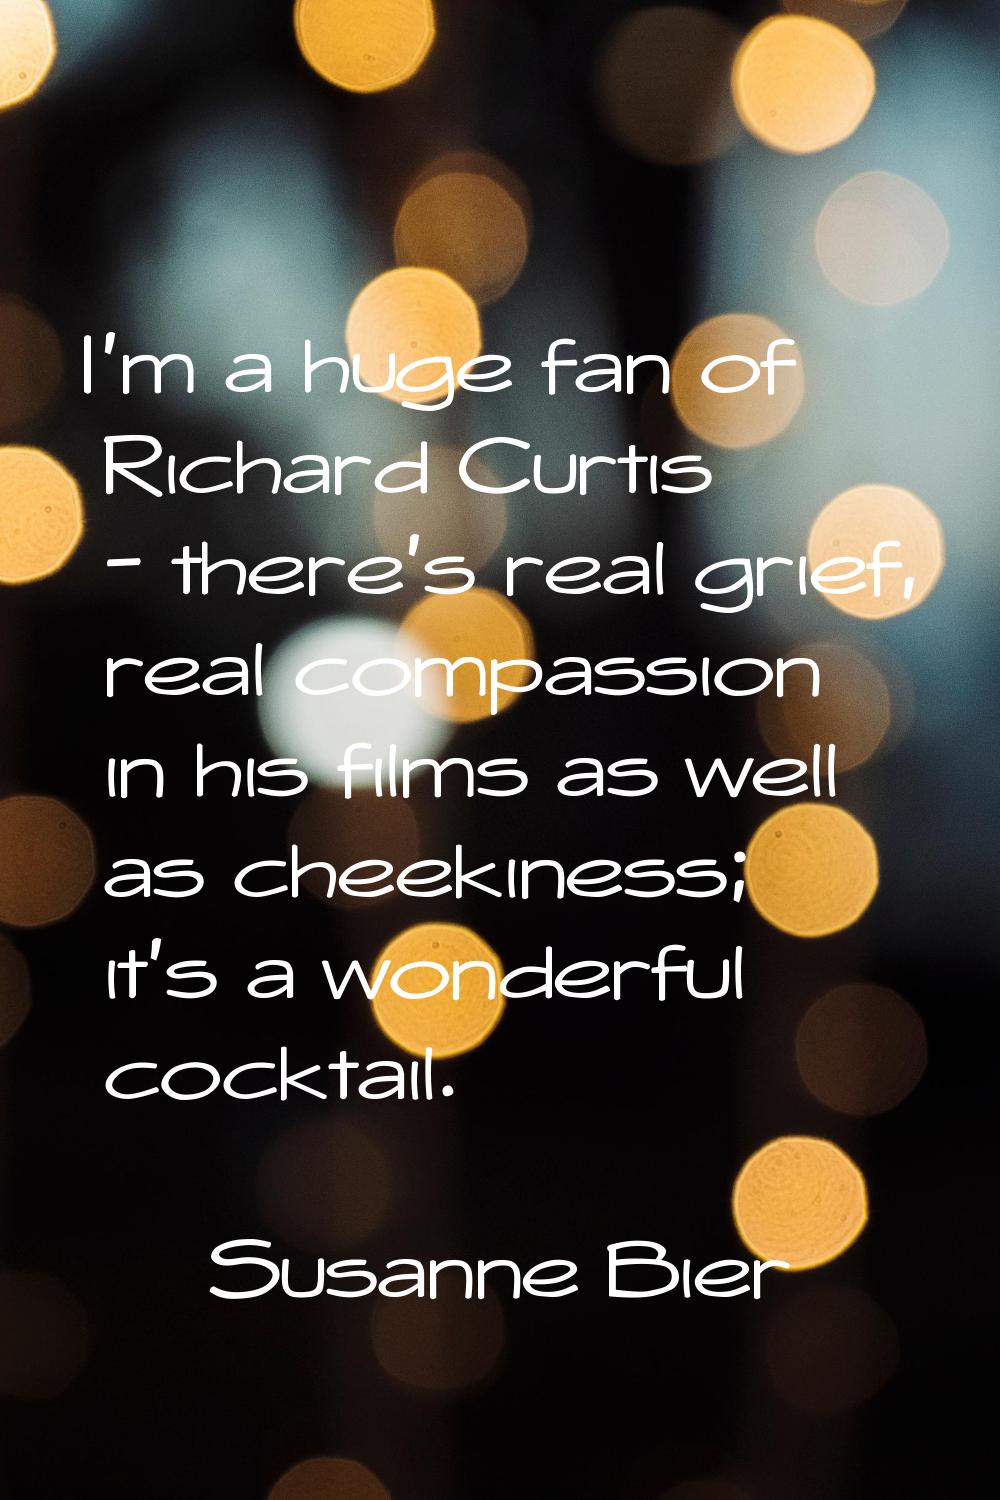 I'm a huge fan of Richard Curtis - there's real grief, real compassion in his films as well as chee